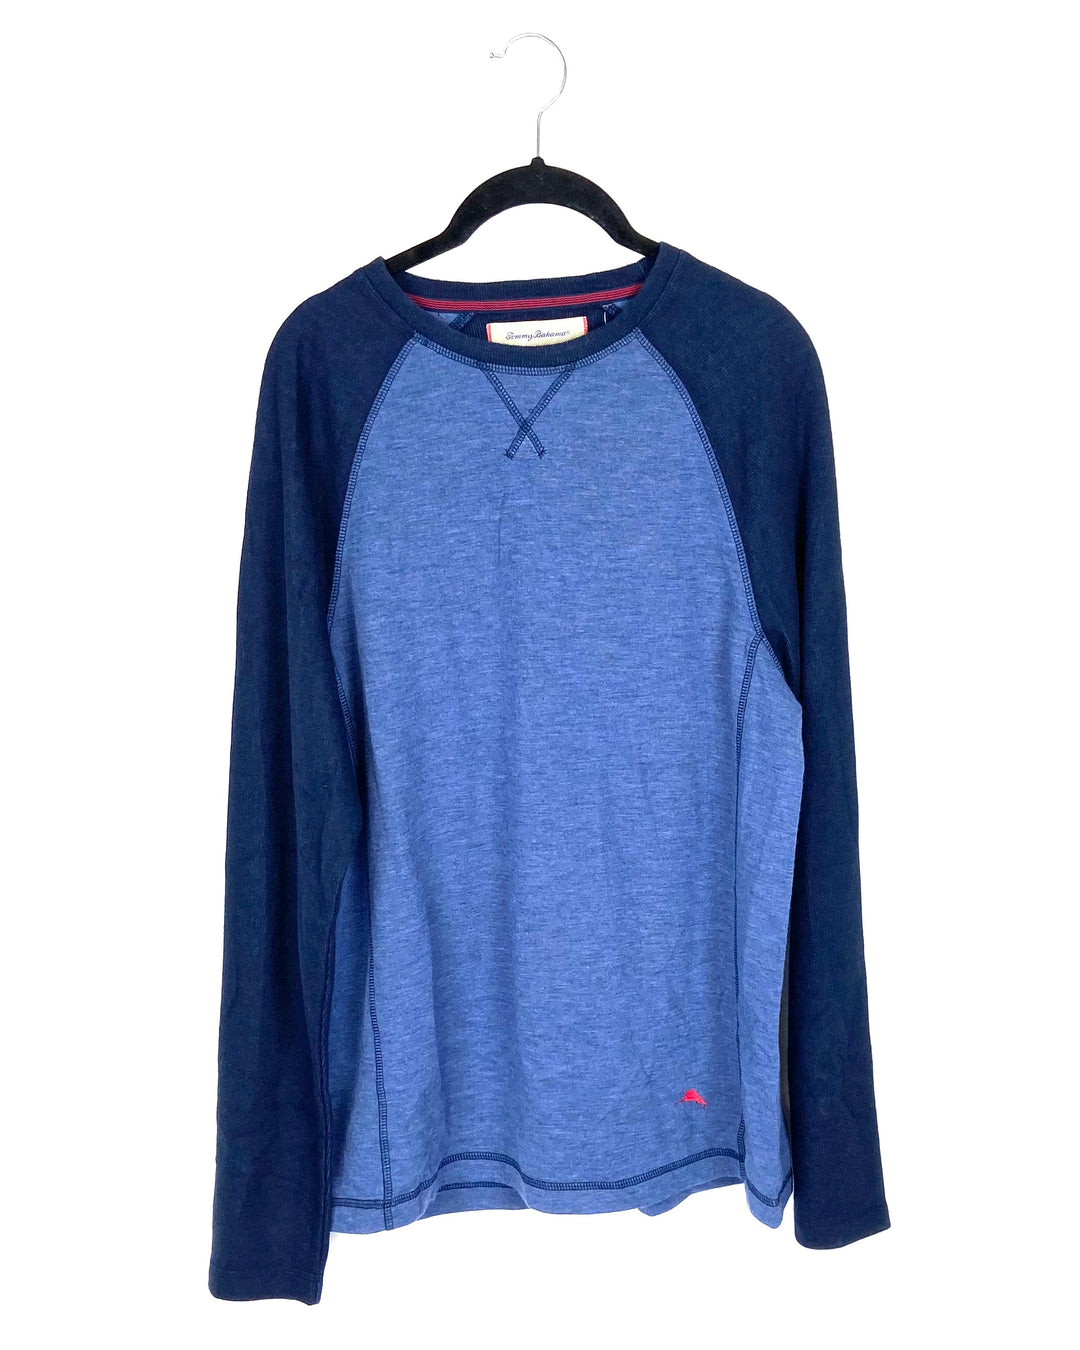 MENS  Blue Long Sleeved Top - Small